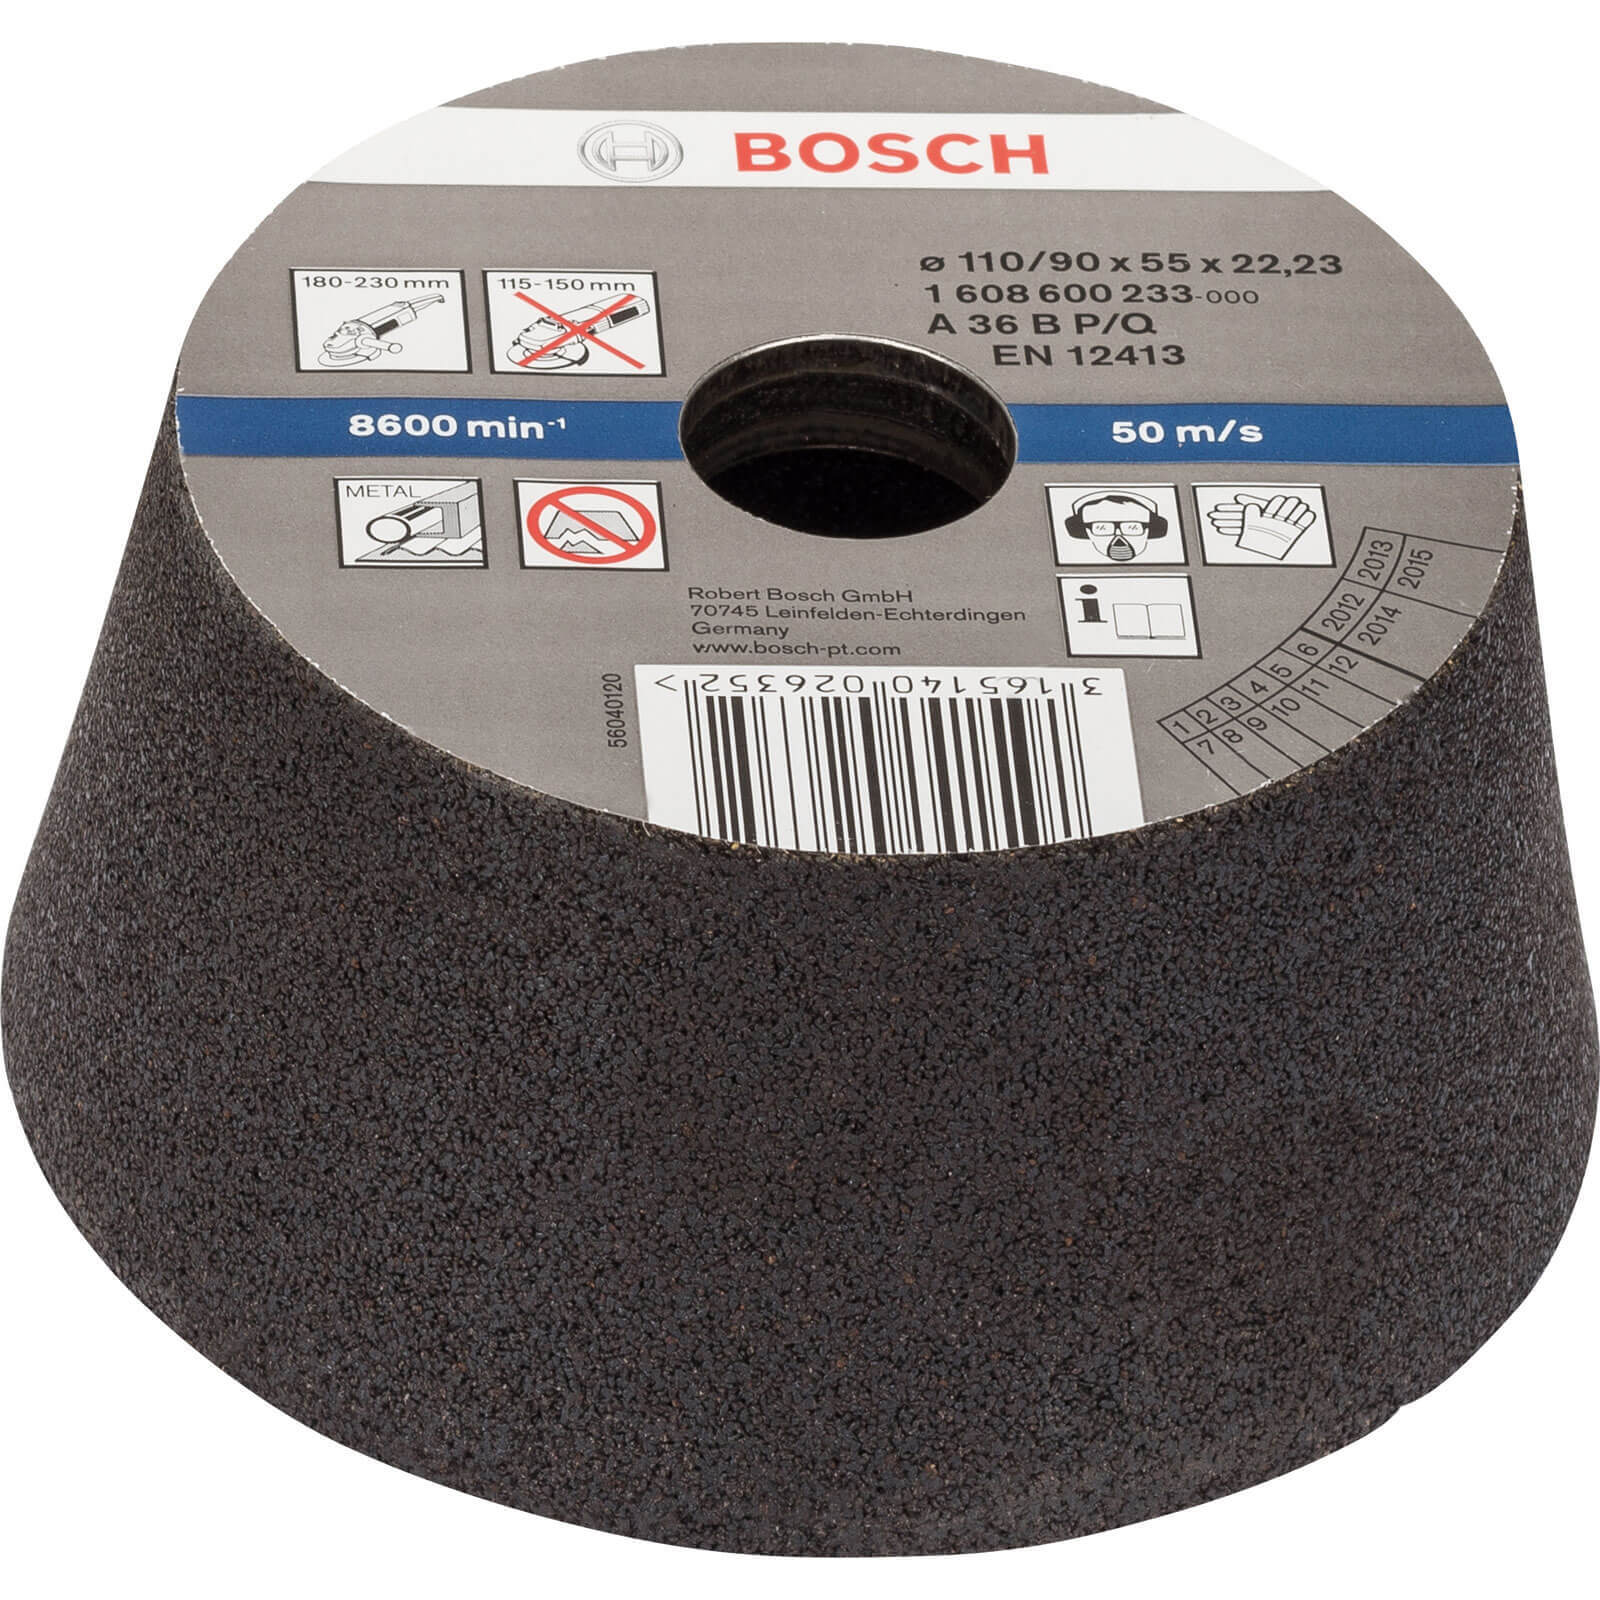 Photos - Power Tool Accessory Bosch Conical Abrasive Cup Wheel for Metal 110mm 36g 